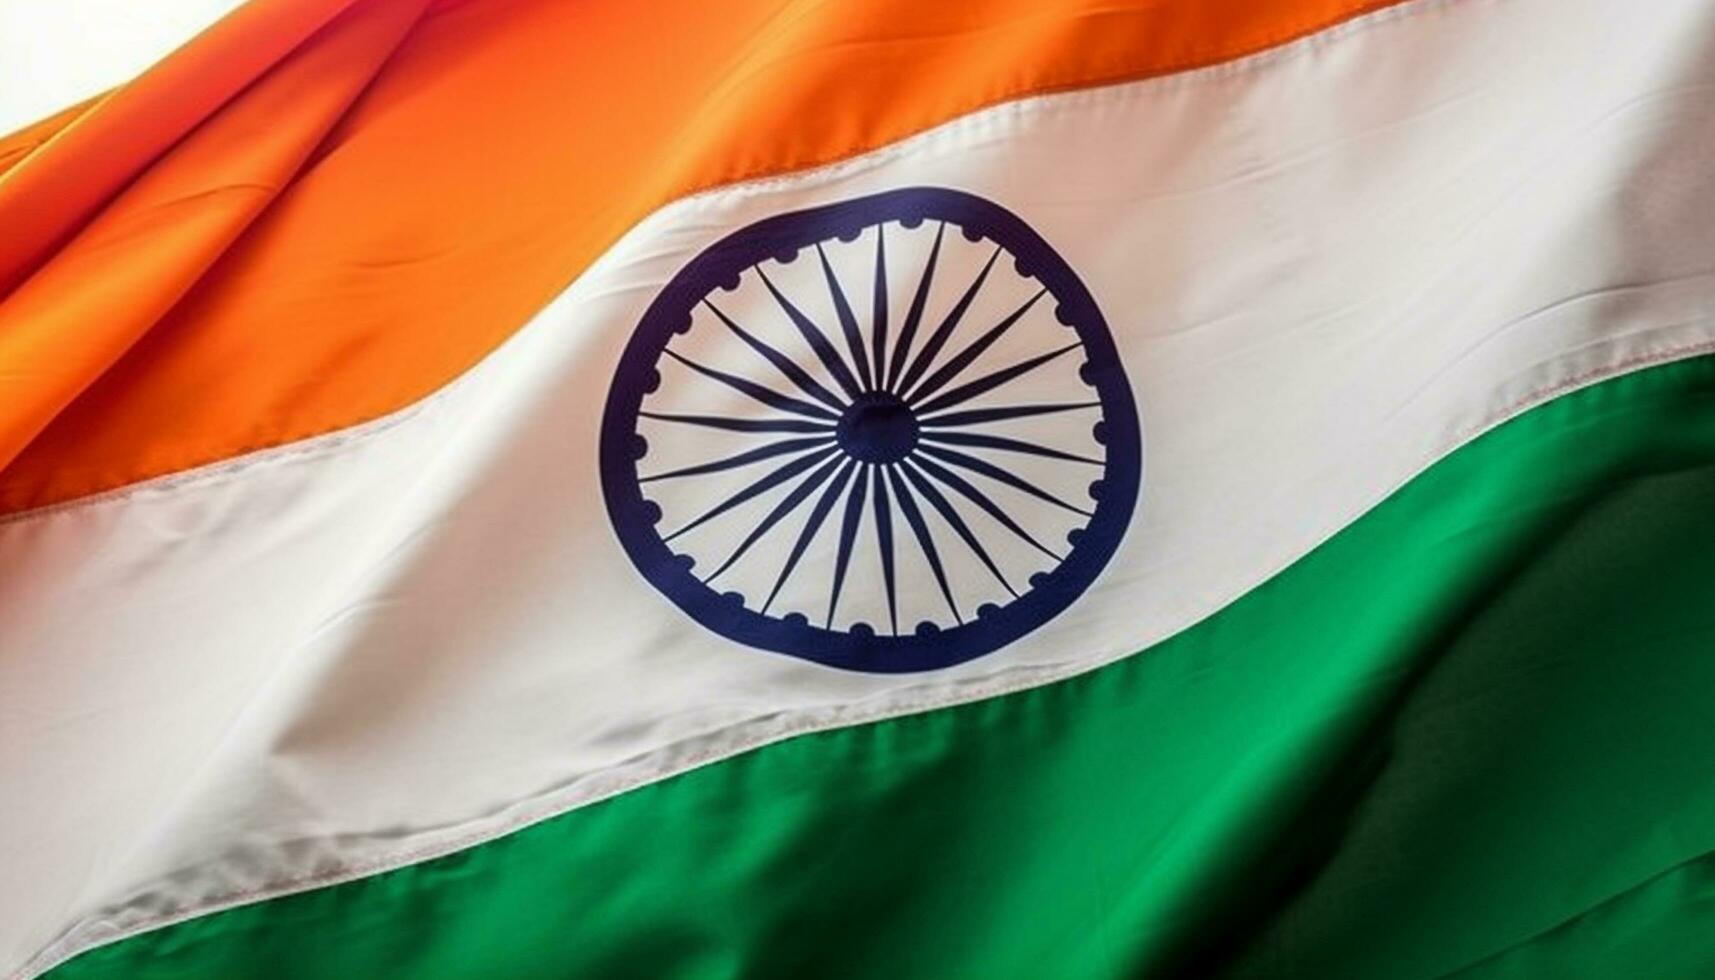 Indian flag waving with pride, symbol of patriotism and honor generated by AI photo